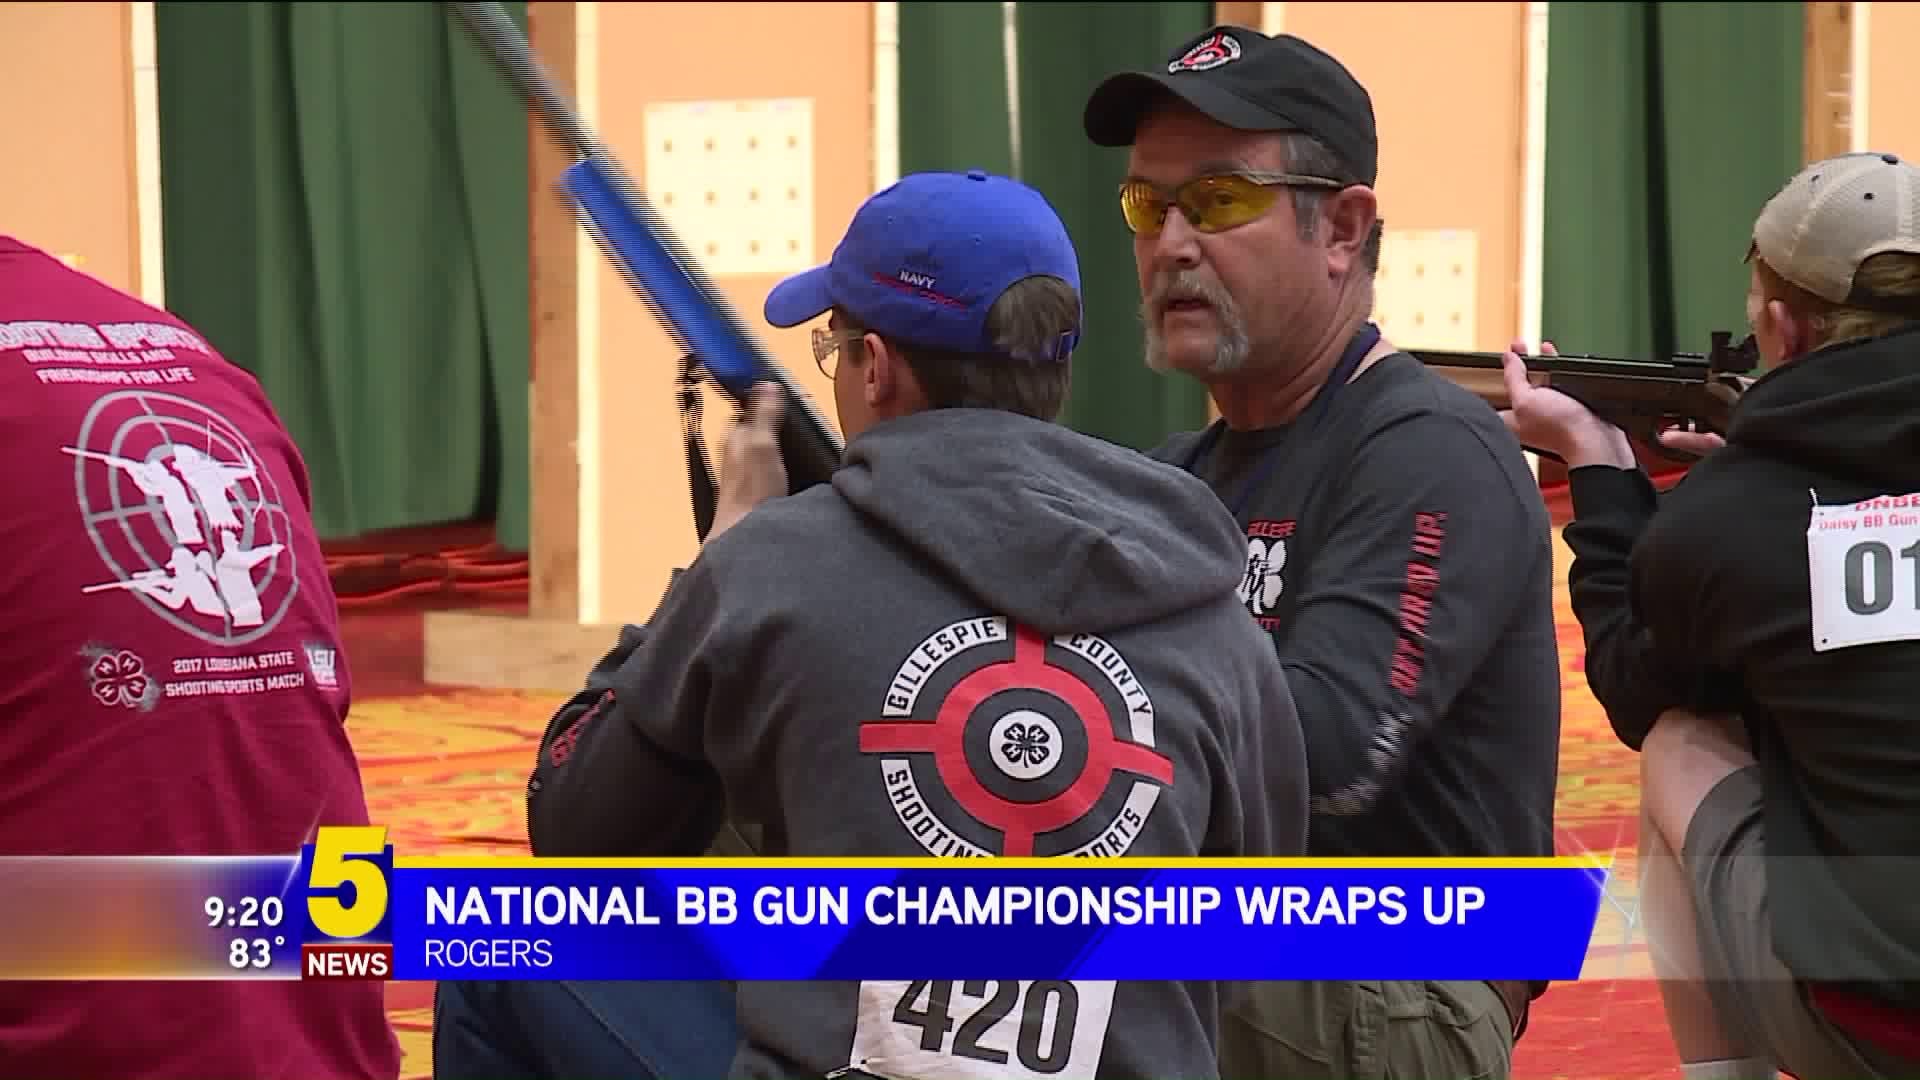 National BB Gun Competition Wraps Up